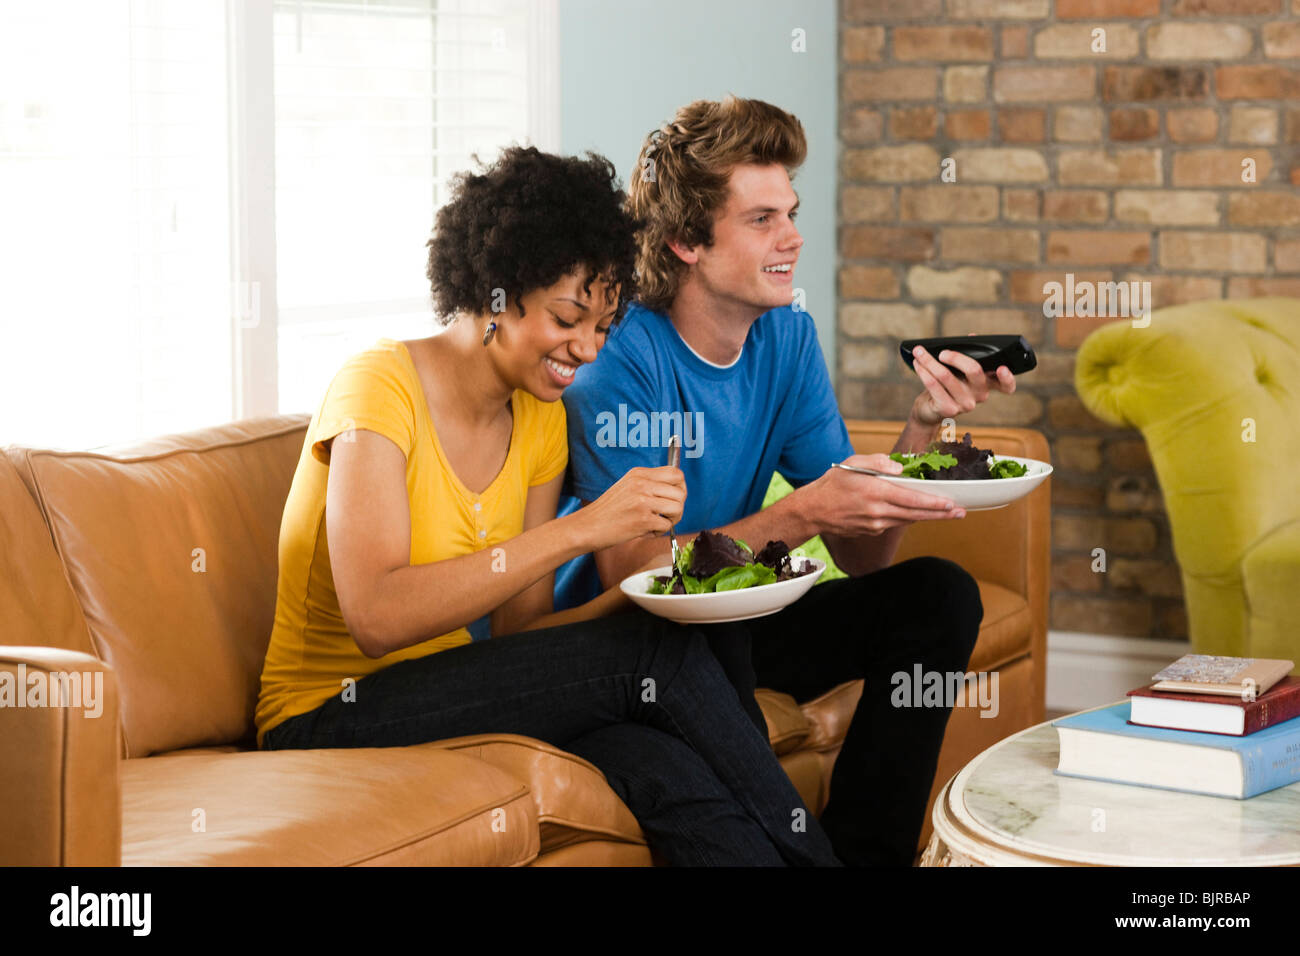 USA, Utah, Provo, young couple eating dinner, watching television Stock Photo